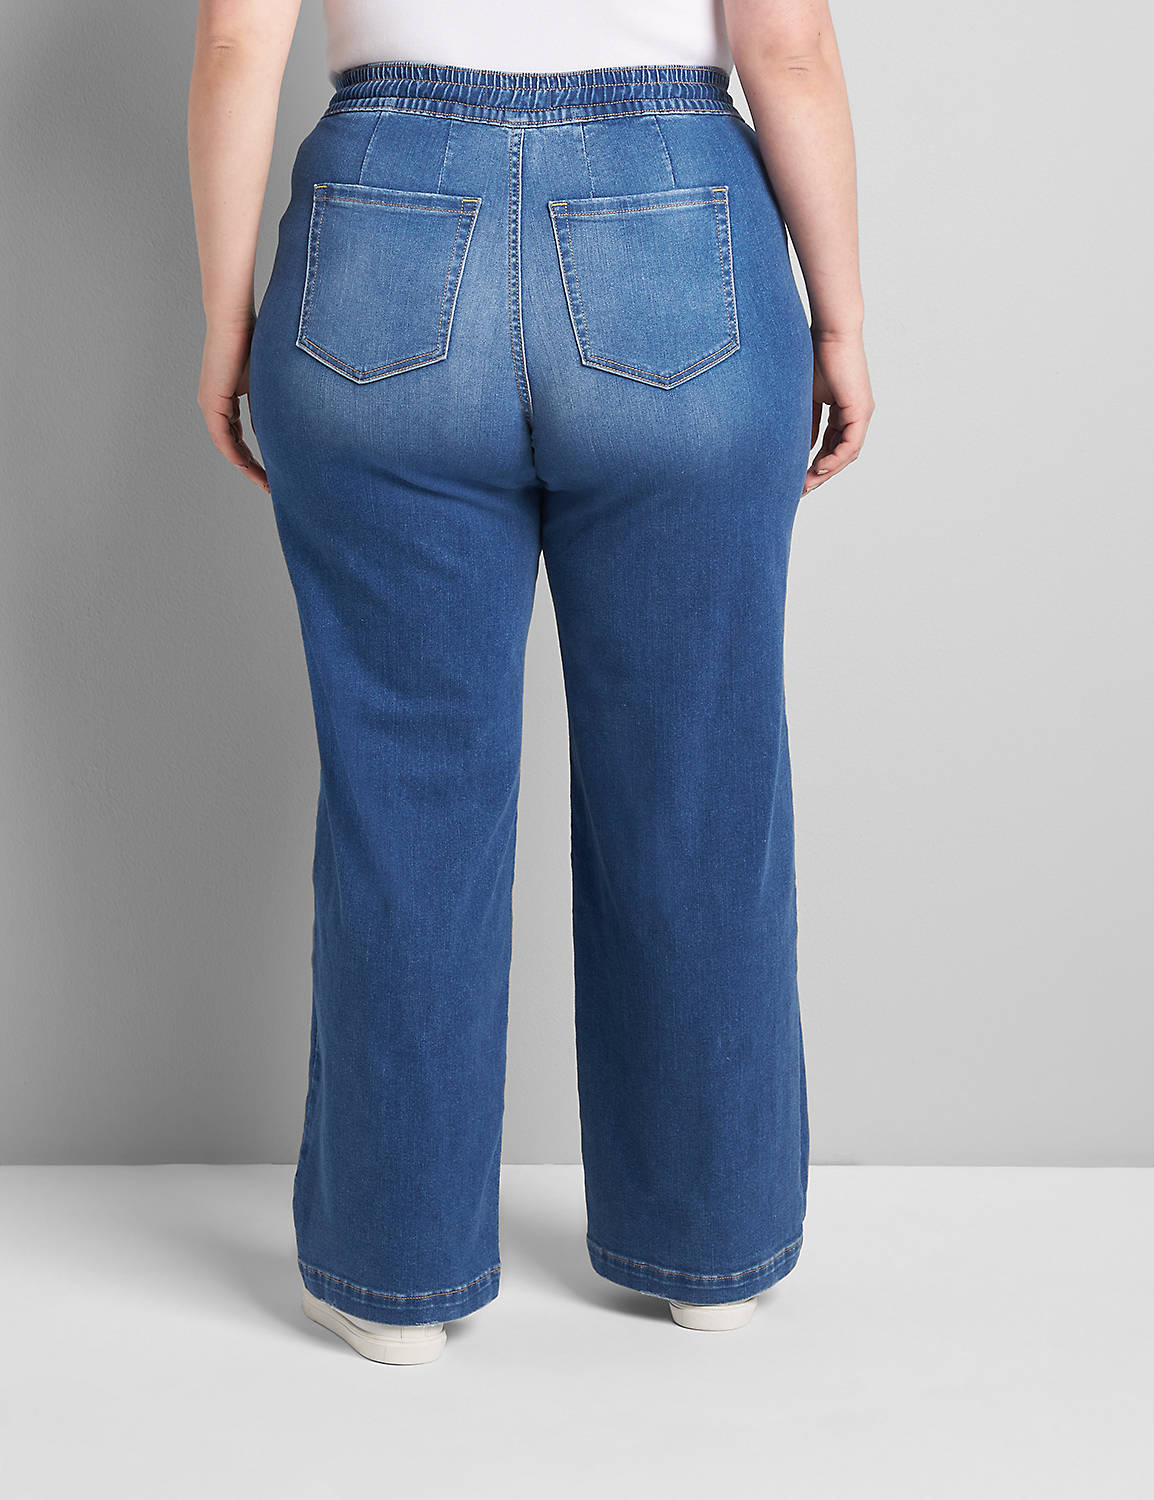 Pull-On Wide Leg Jean Product Image 2